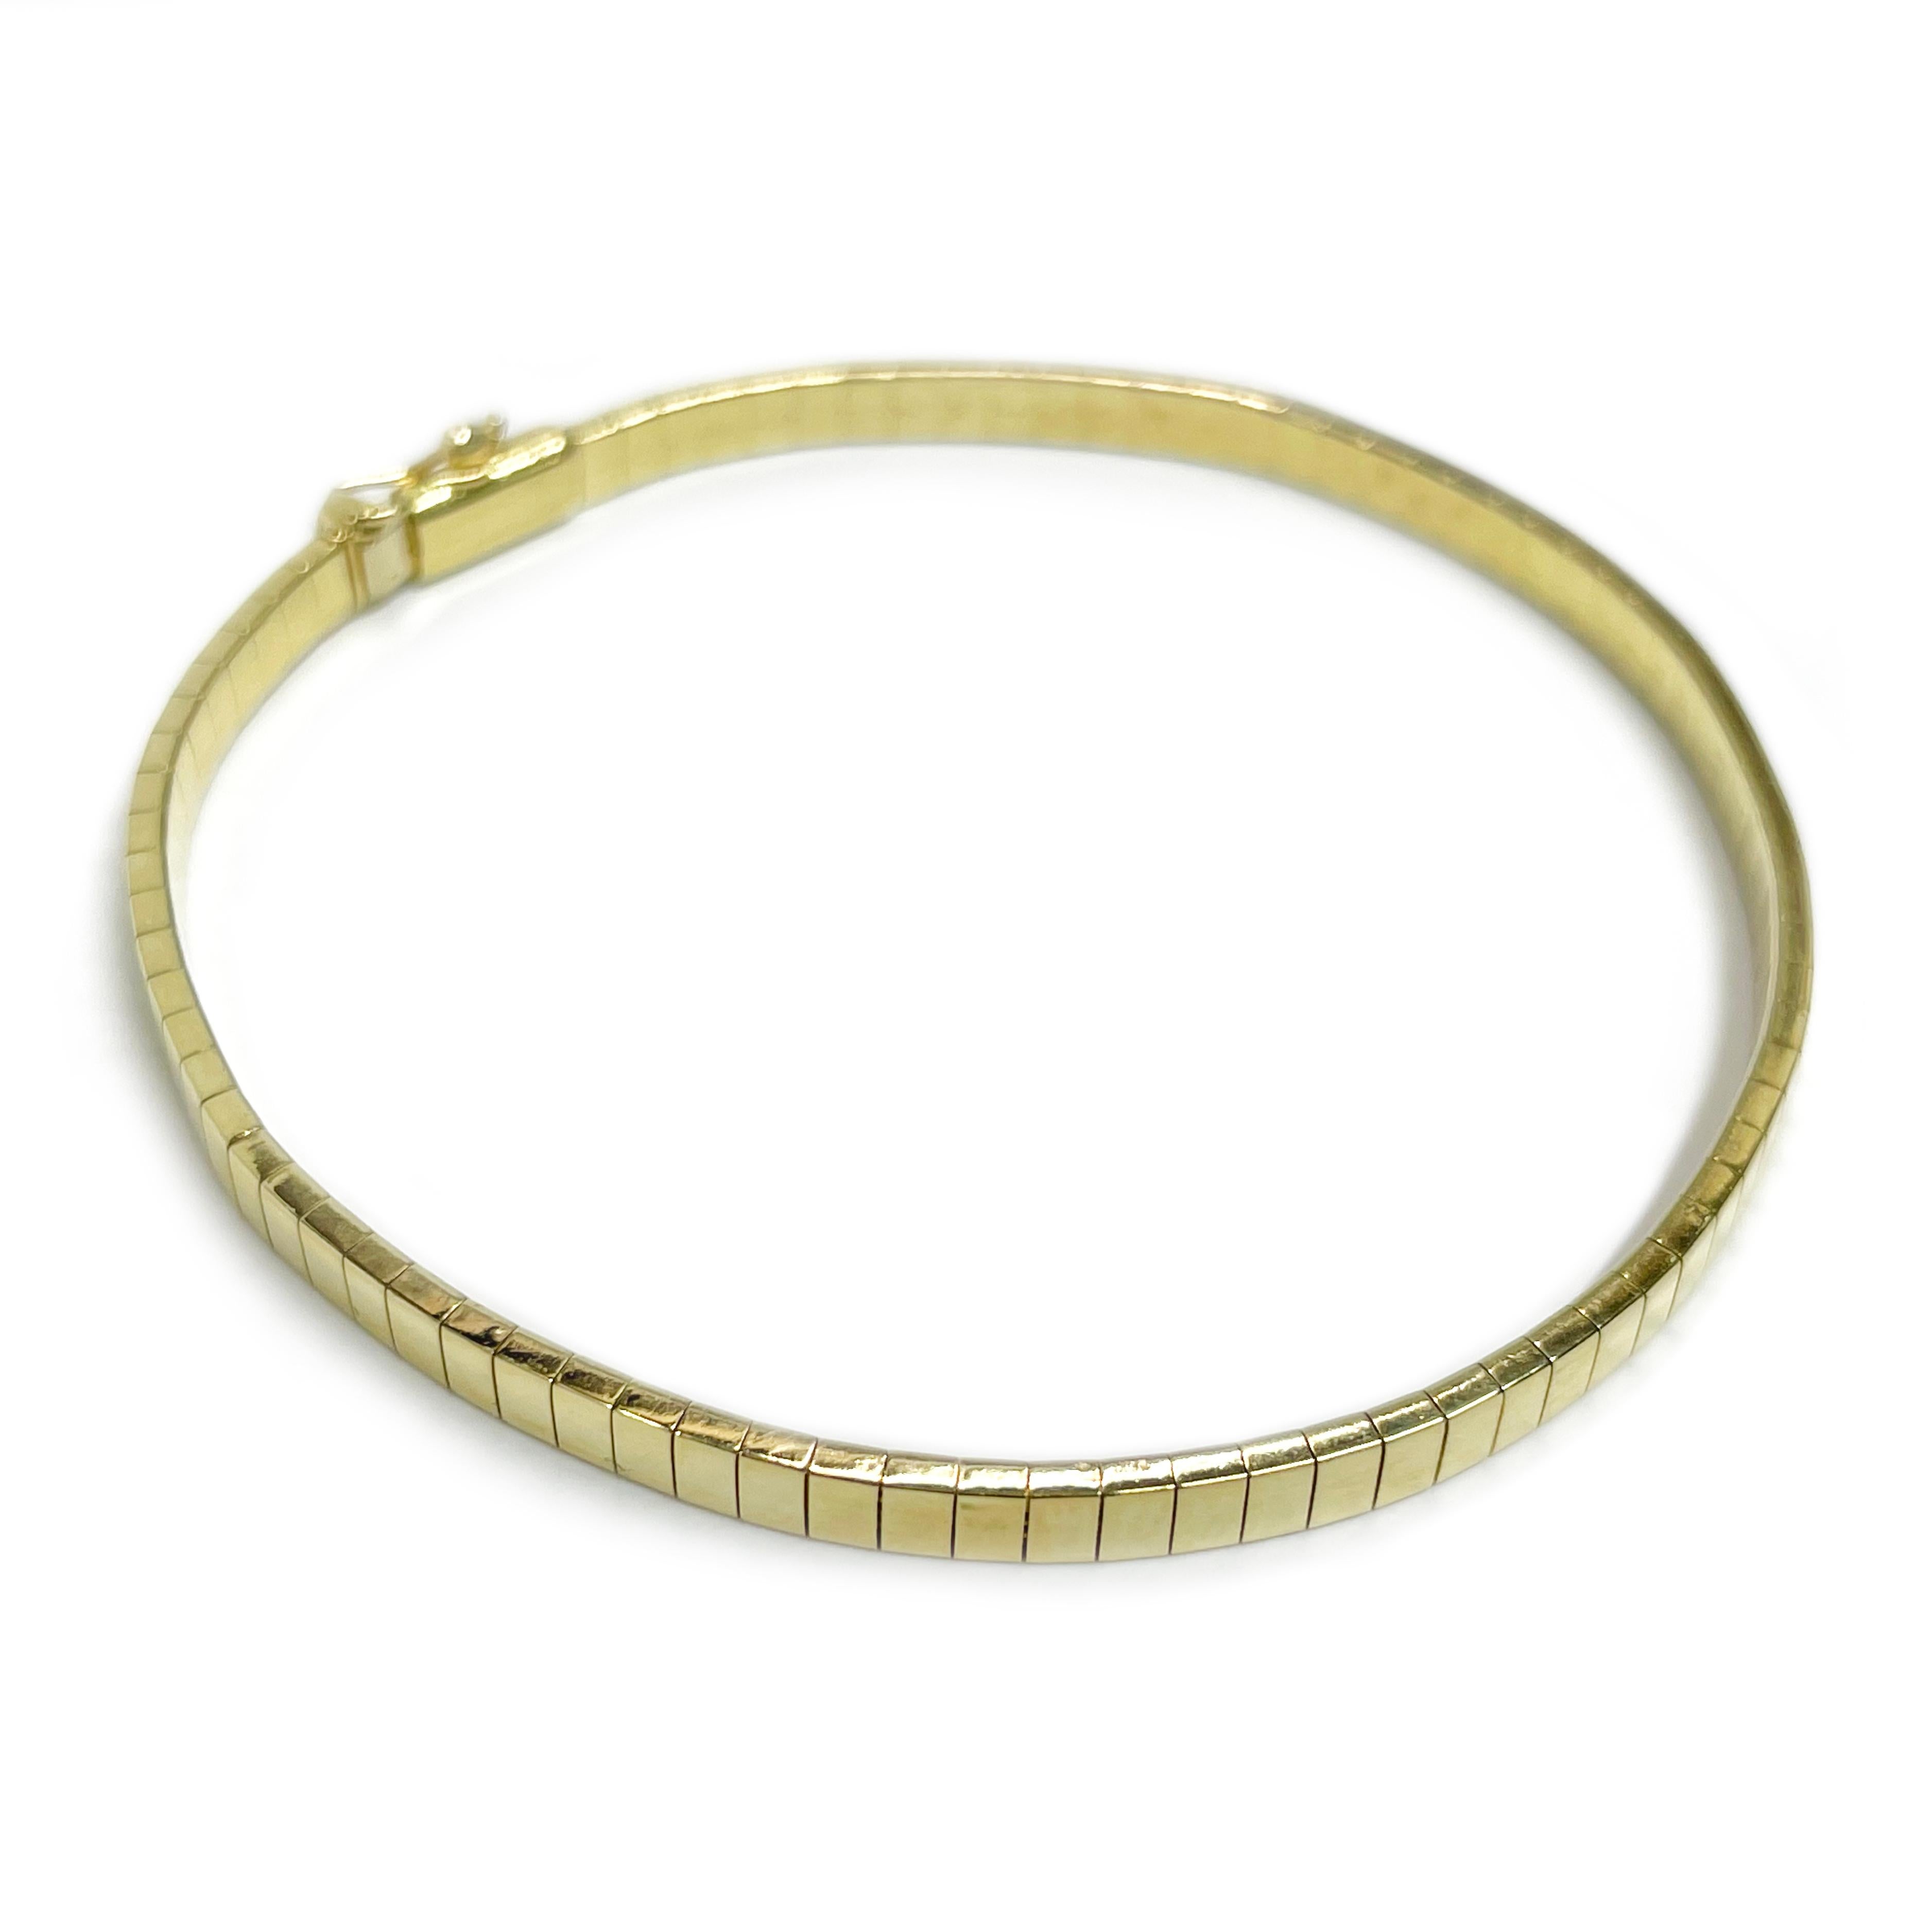 14 Karat Yellow Gold Omega Bracelet. The bracelet has a smooth shiny finish. The bracelet is 3.5mm wide and 7